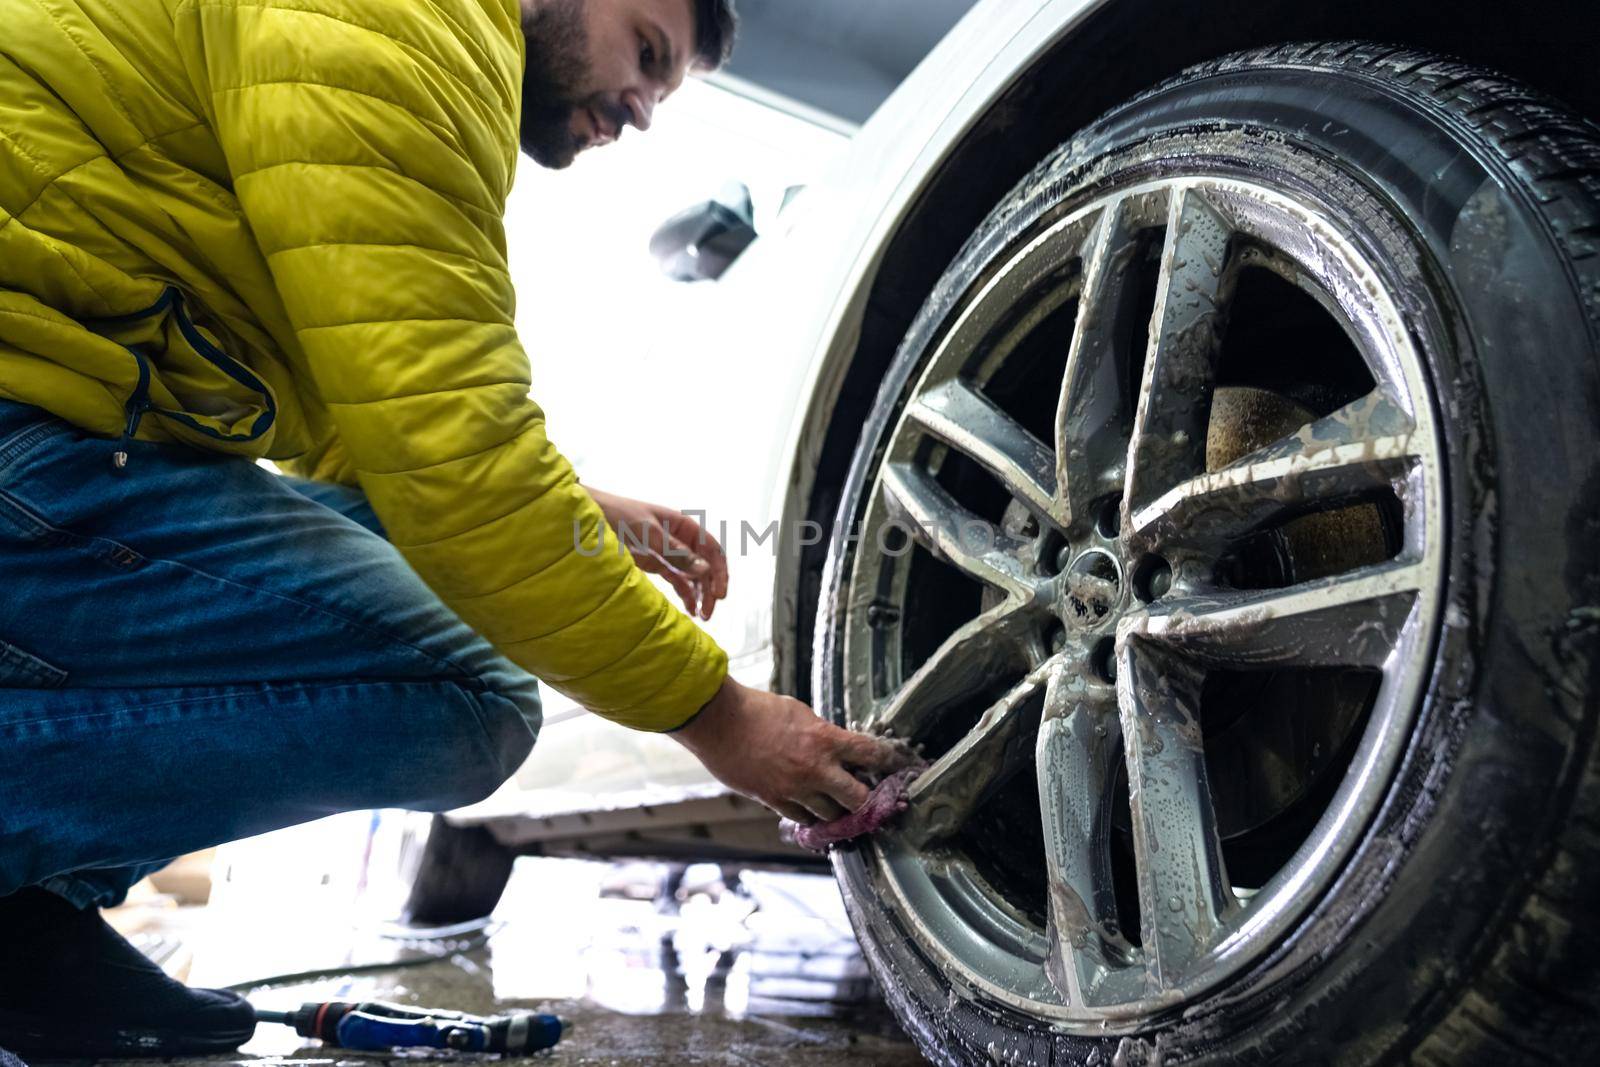 Manual car wheel cleaning with the help of sponges and foam by Edophoto